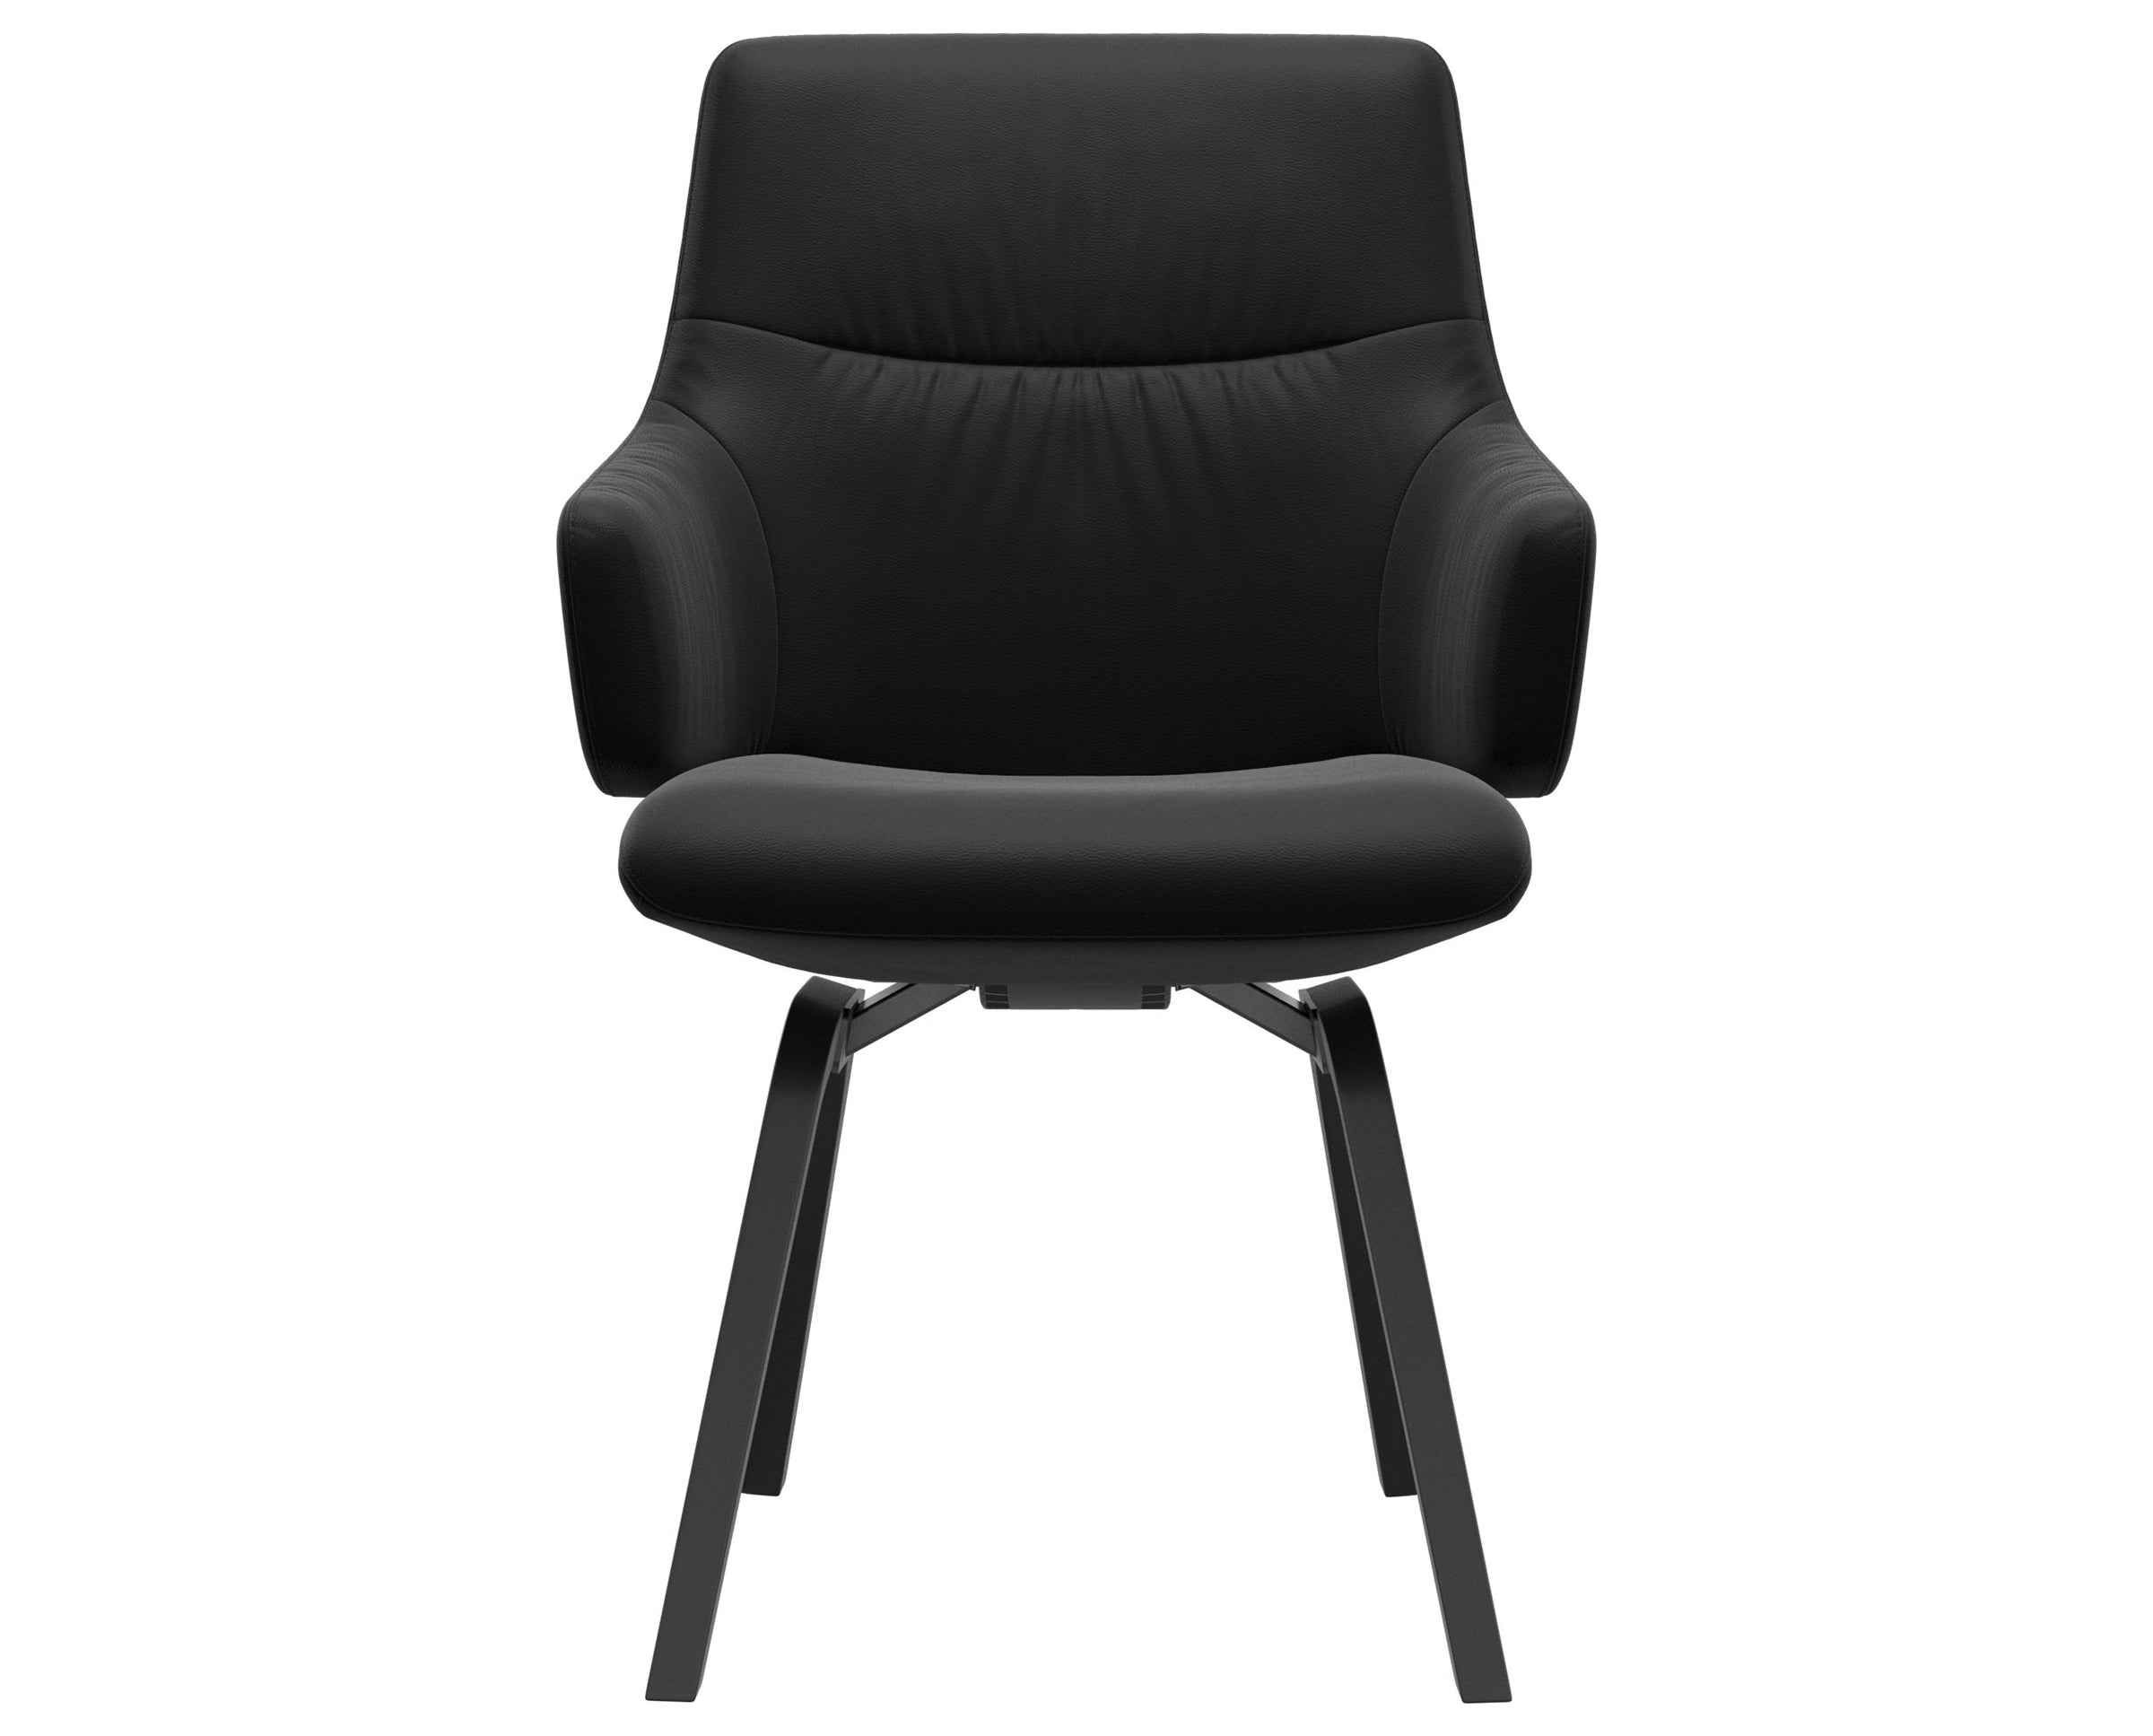 Paloma Leather Black and Black Base | Stressless Mint Low Back D200 Dining Chair w/Arms | Valley Ridge Furniture